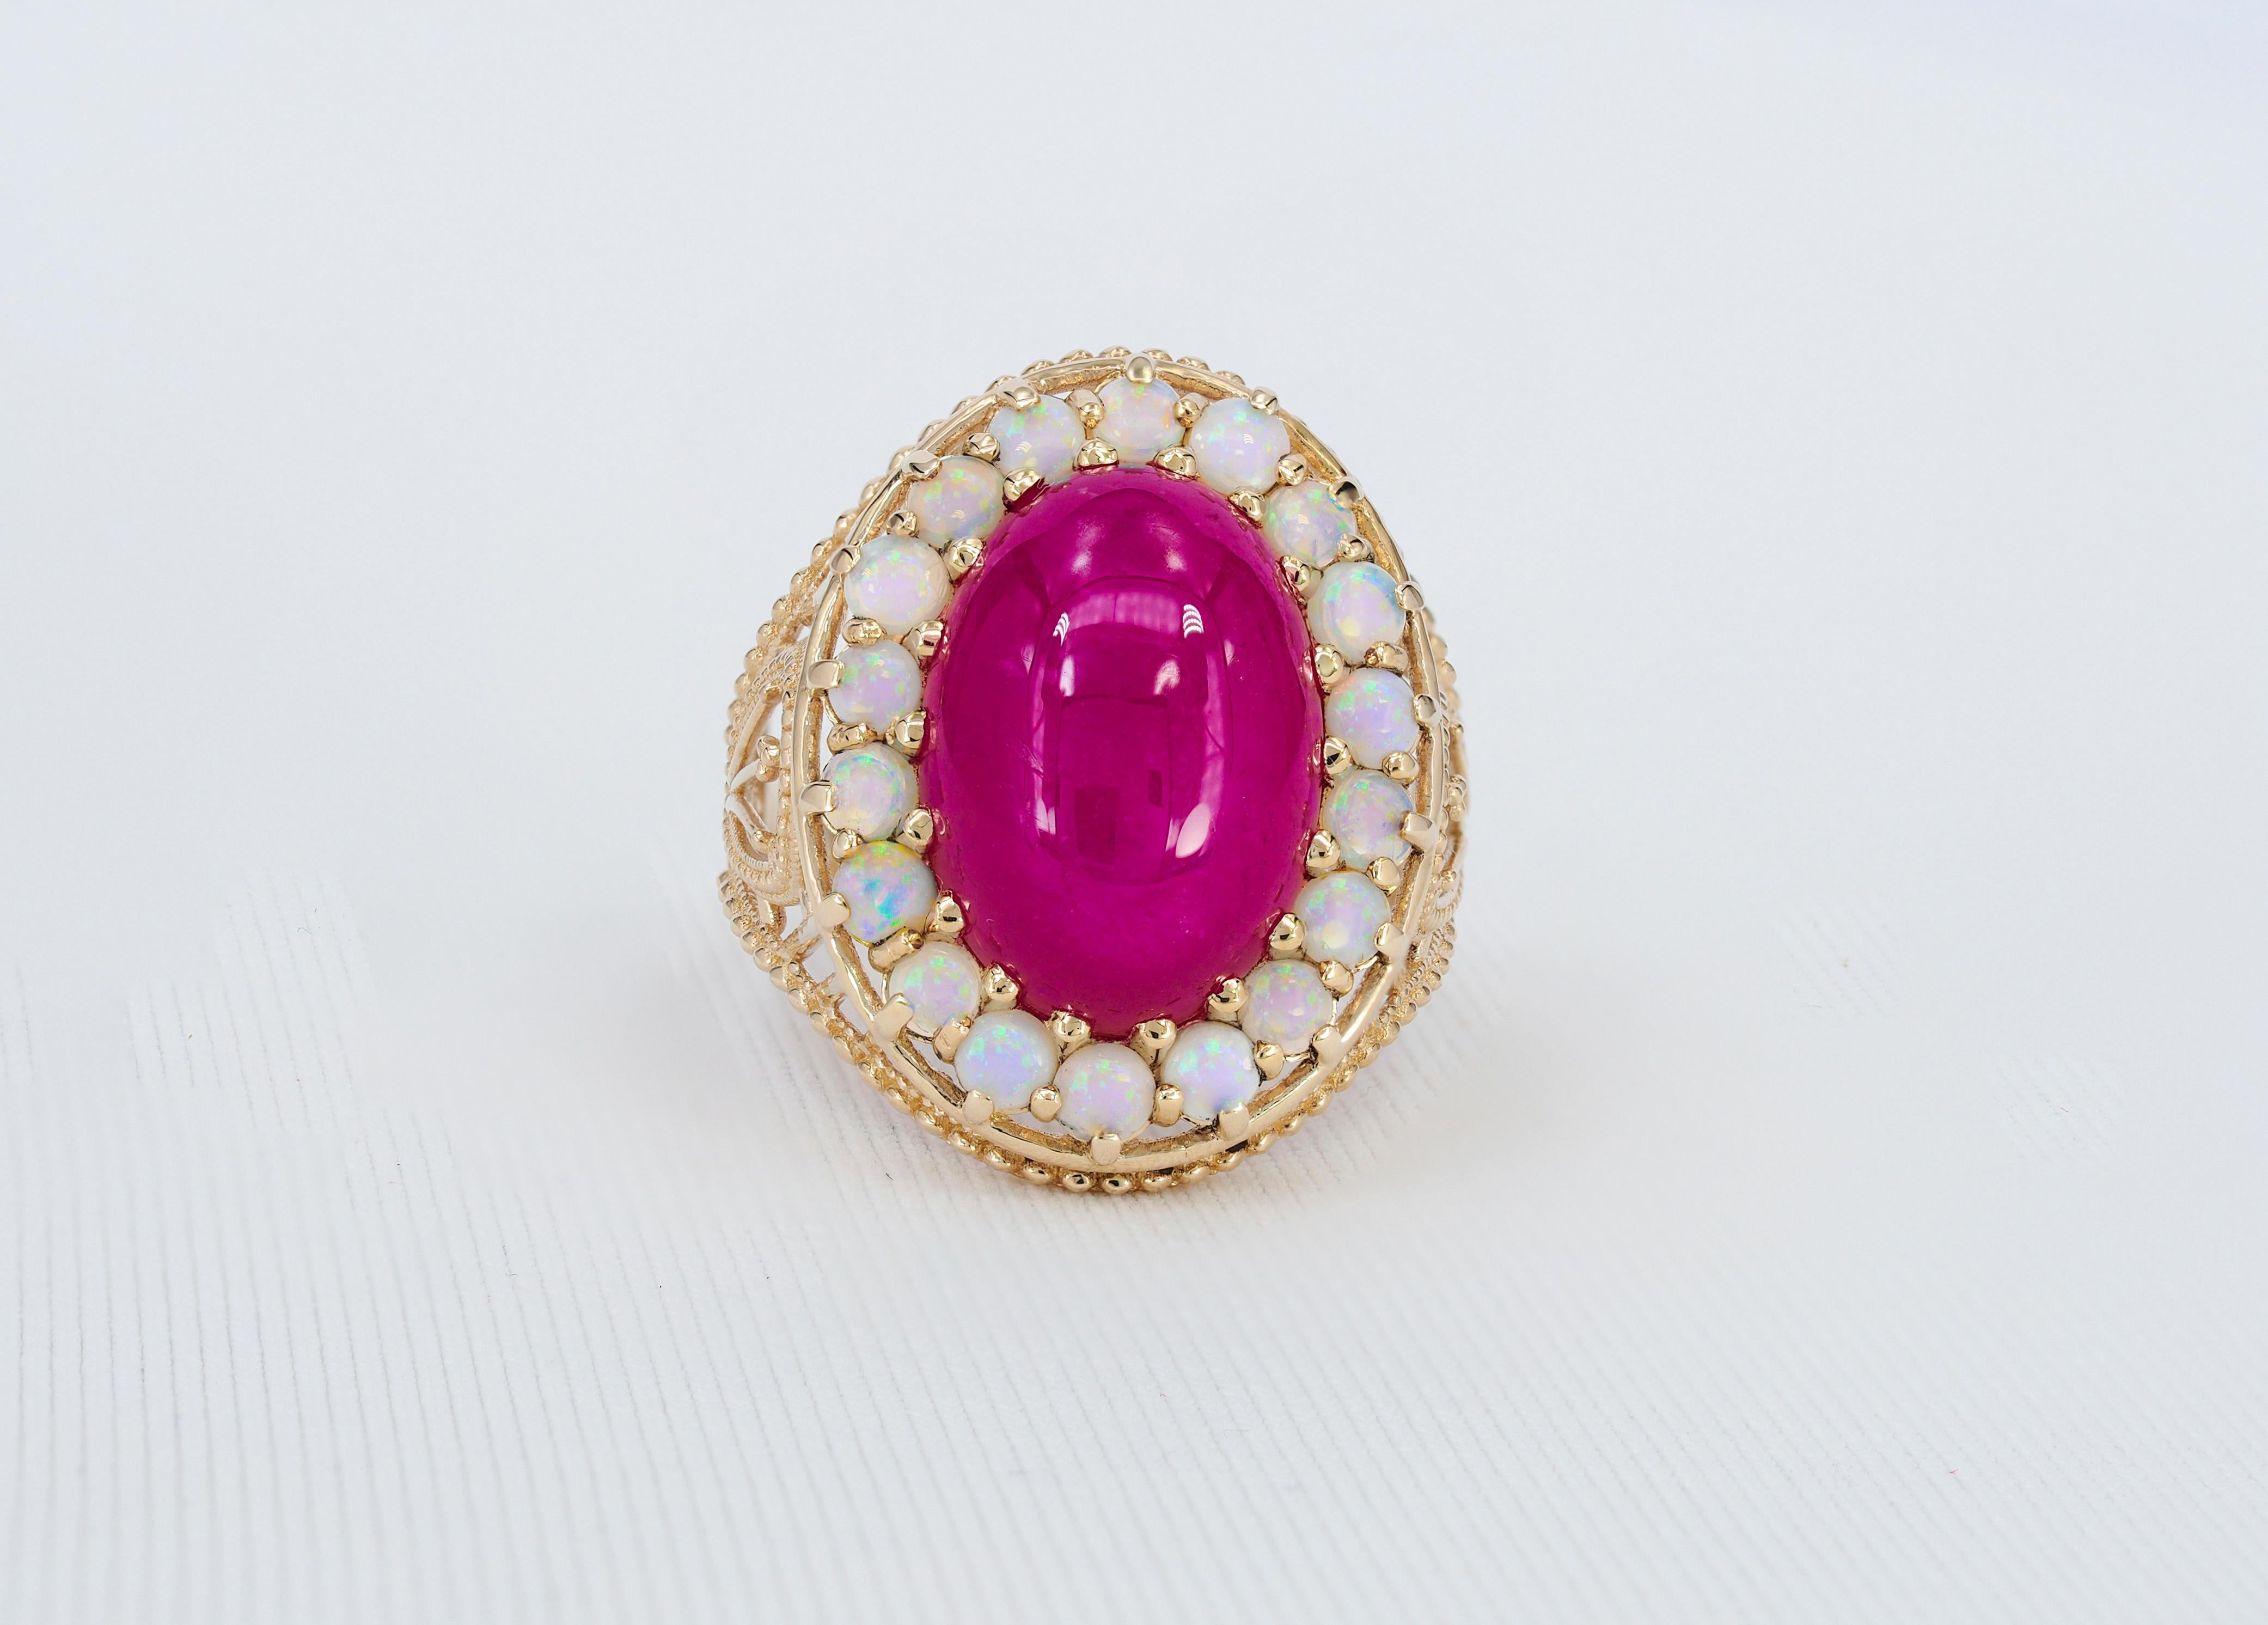 For Sale:  14k Massive Gold Ring with Cabochon Ruby and Opals, Vintage Inspired Ring 3